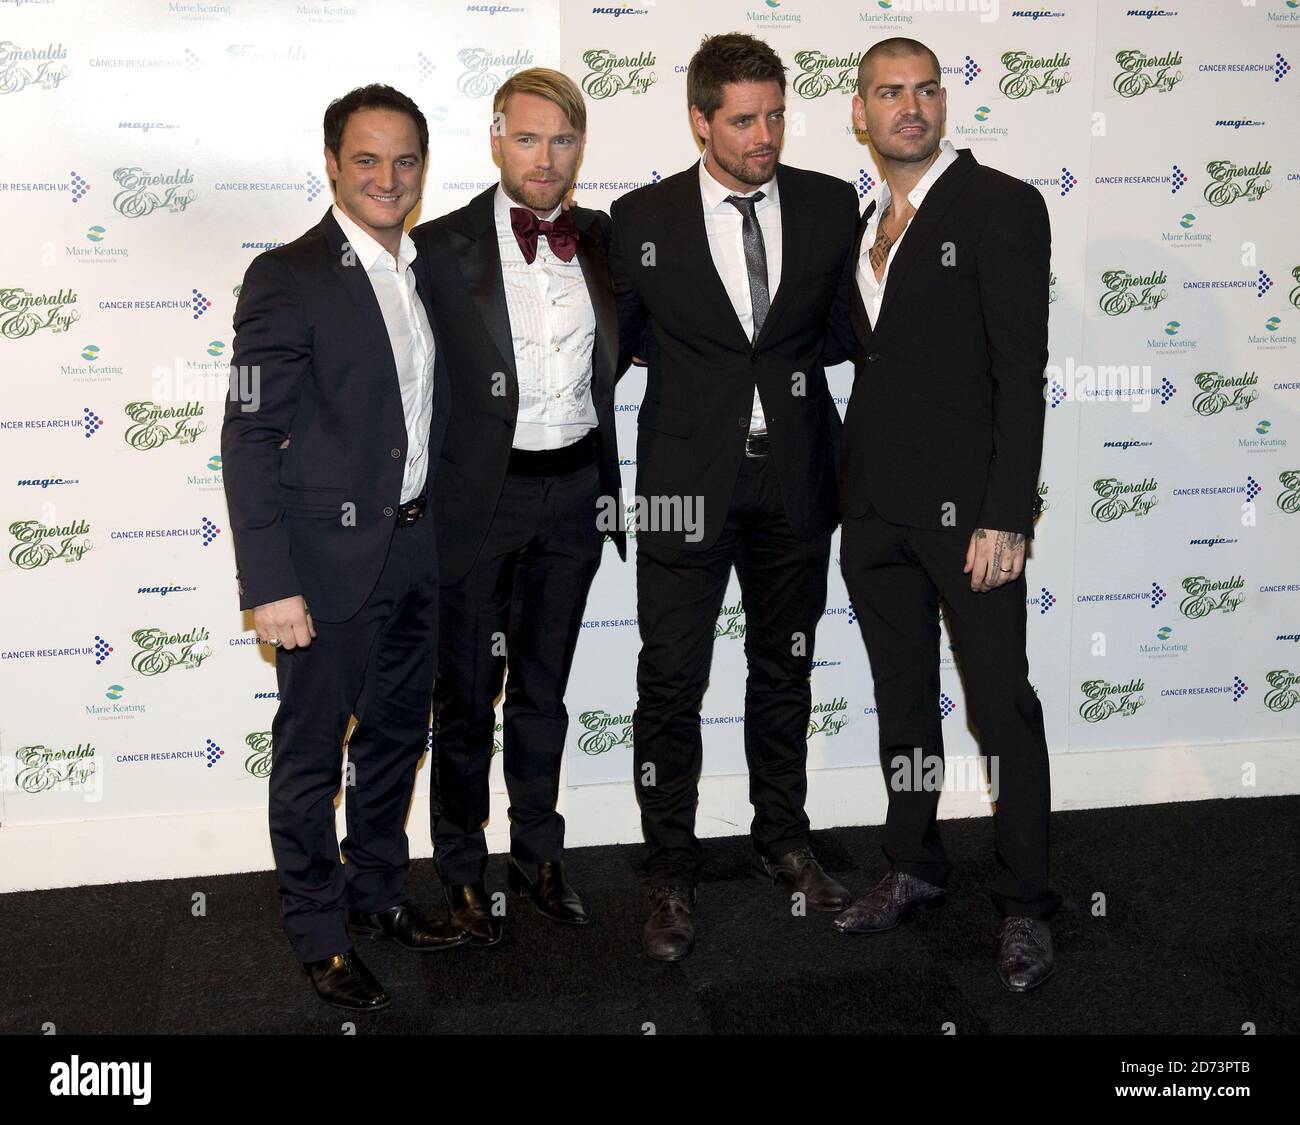 (l-r) Mikey Graham, Ronan Keating, Keith Duffy and Shane Lynch of Boyzone arrive at the Emeralds and Ivy Ball in aid of Cancer Research UK held at Battersea Evolution in south London Stock Photo